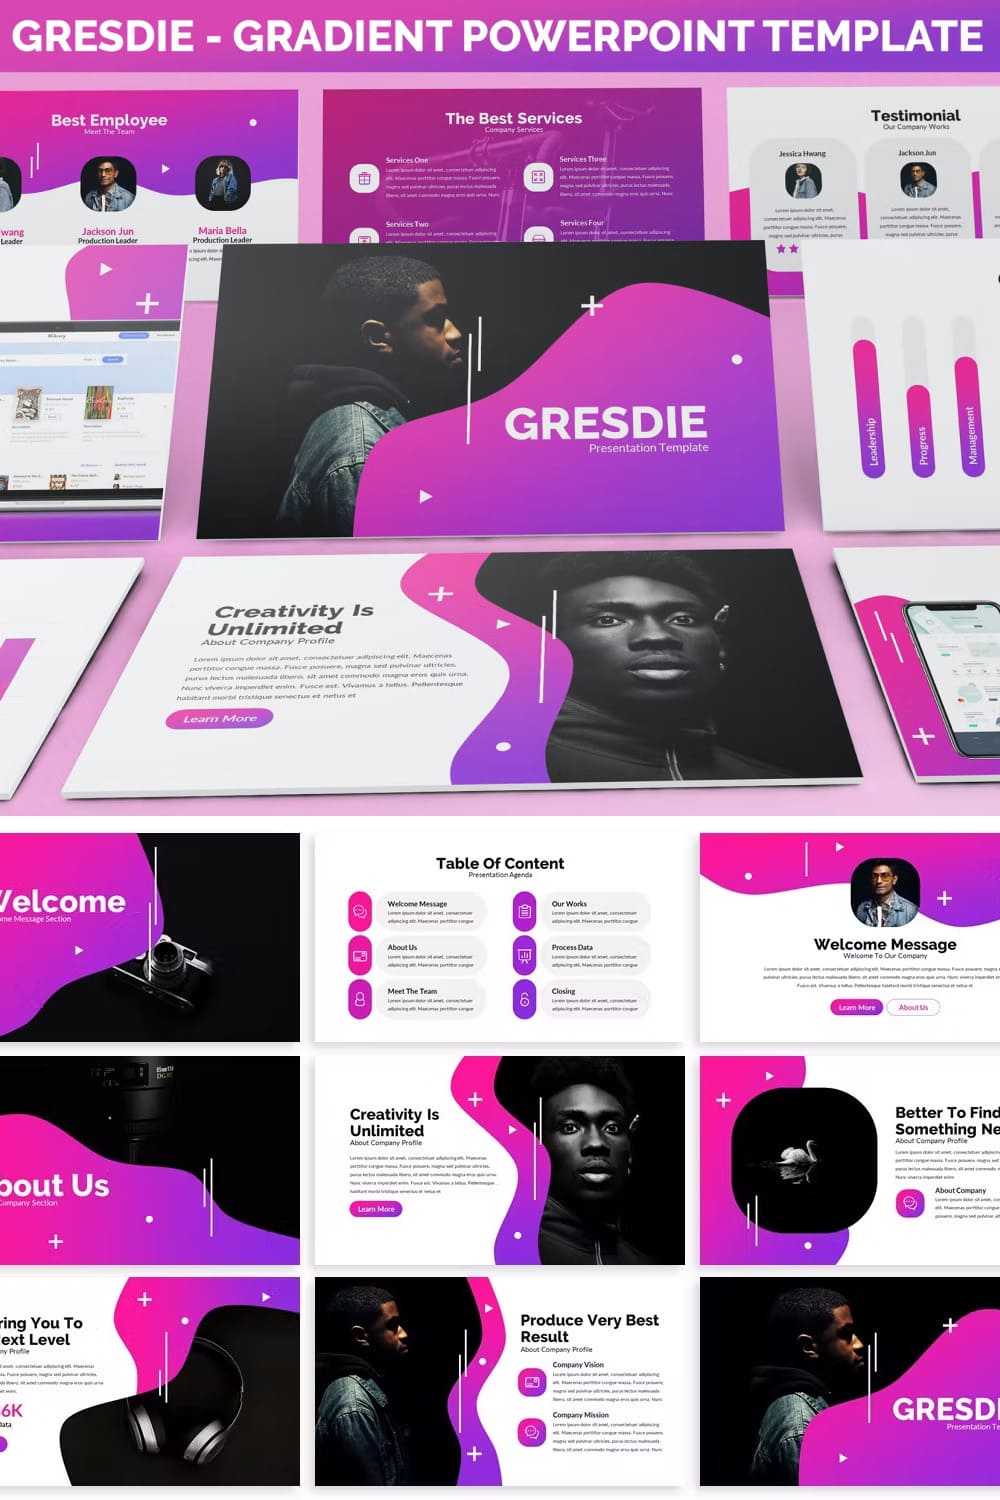 Gresdie gradient abstract powerpoint template - pinterest image preview.